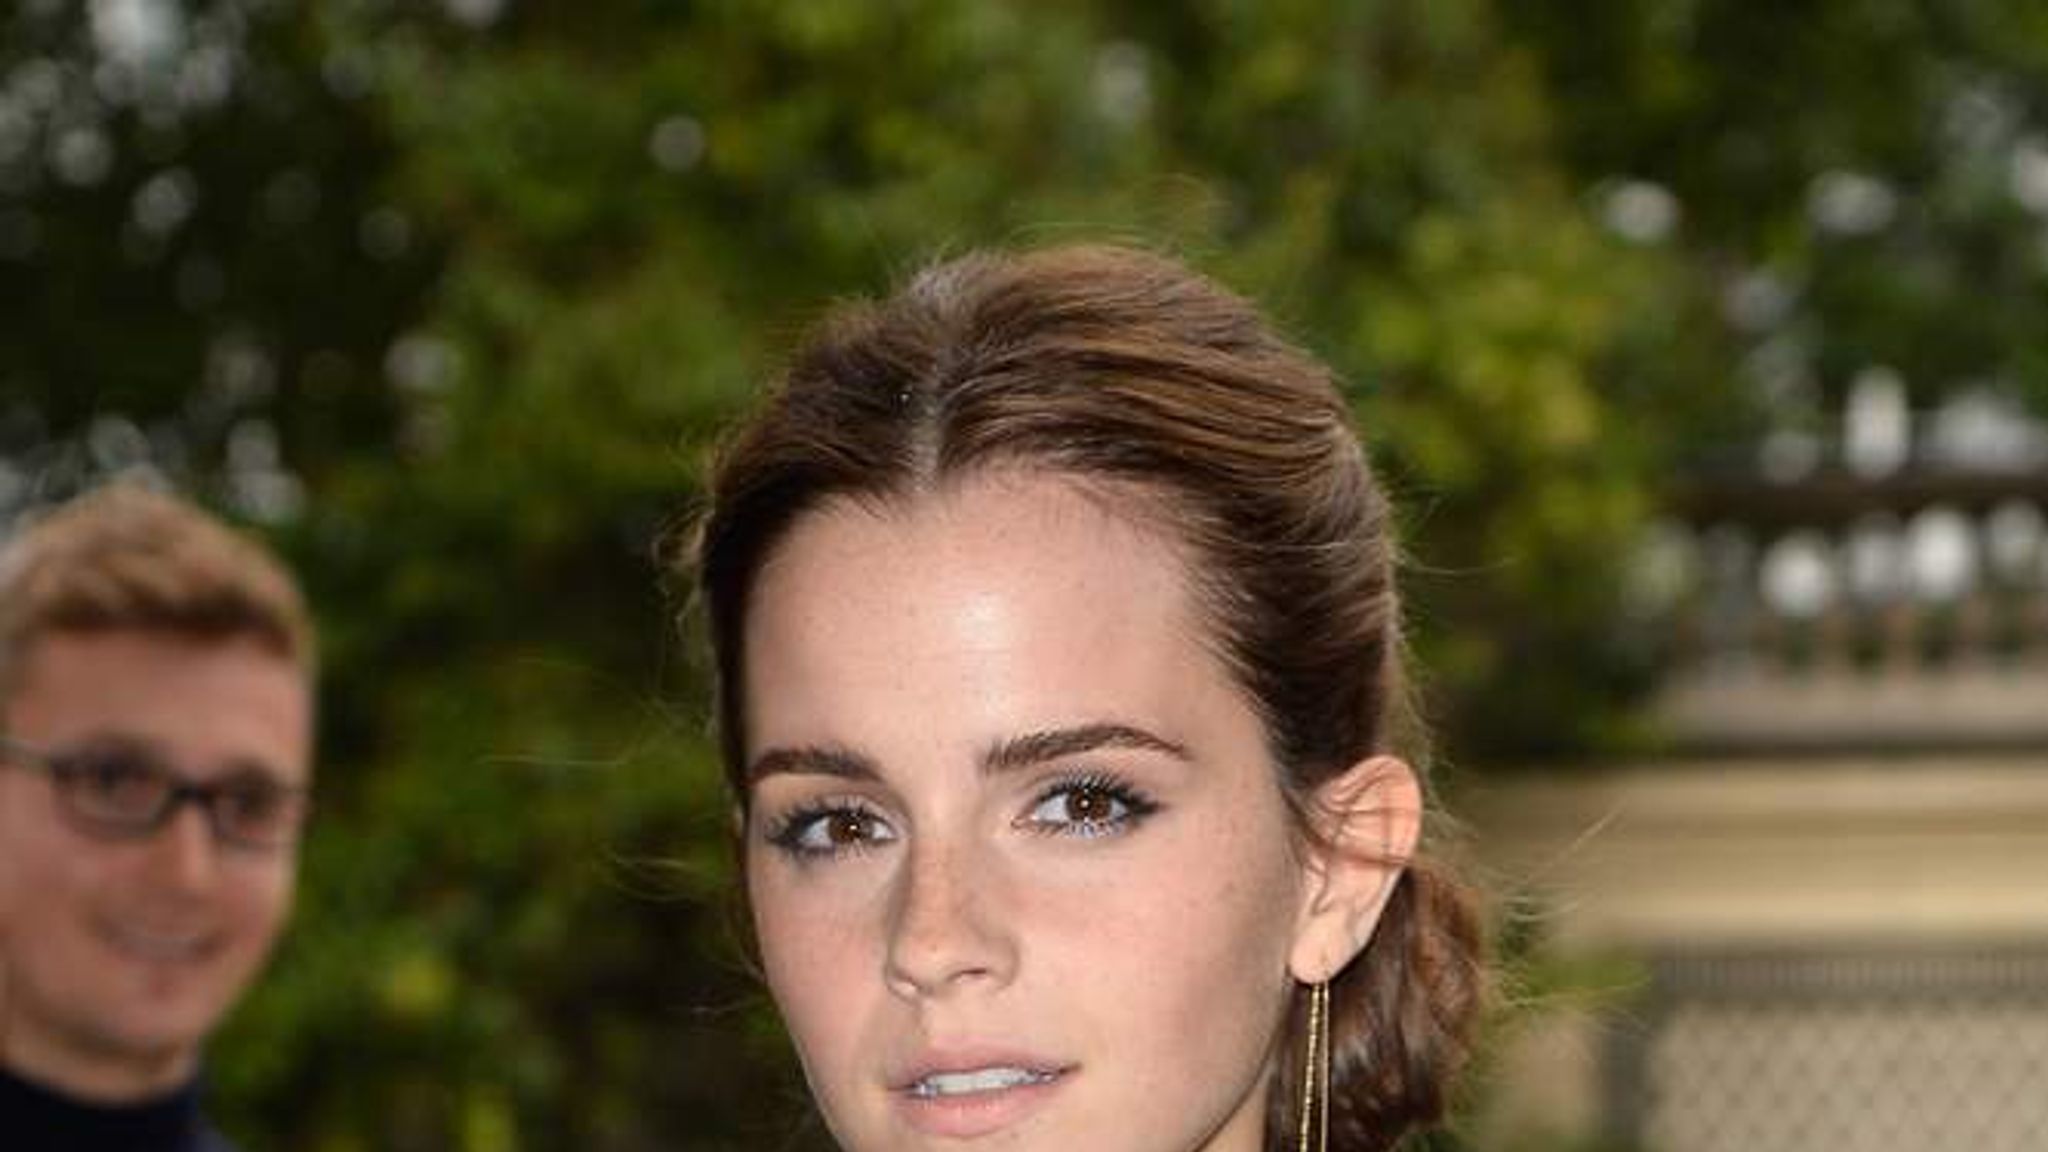 danyel myers recommends emma watson porn tumblr pic